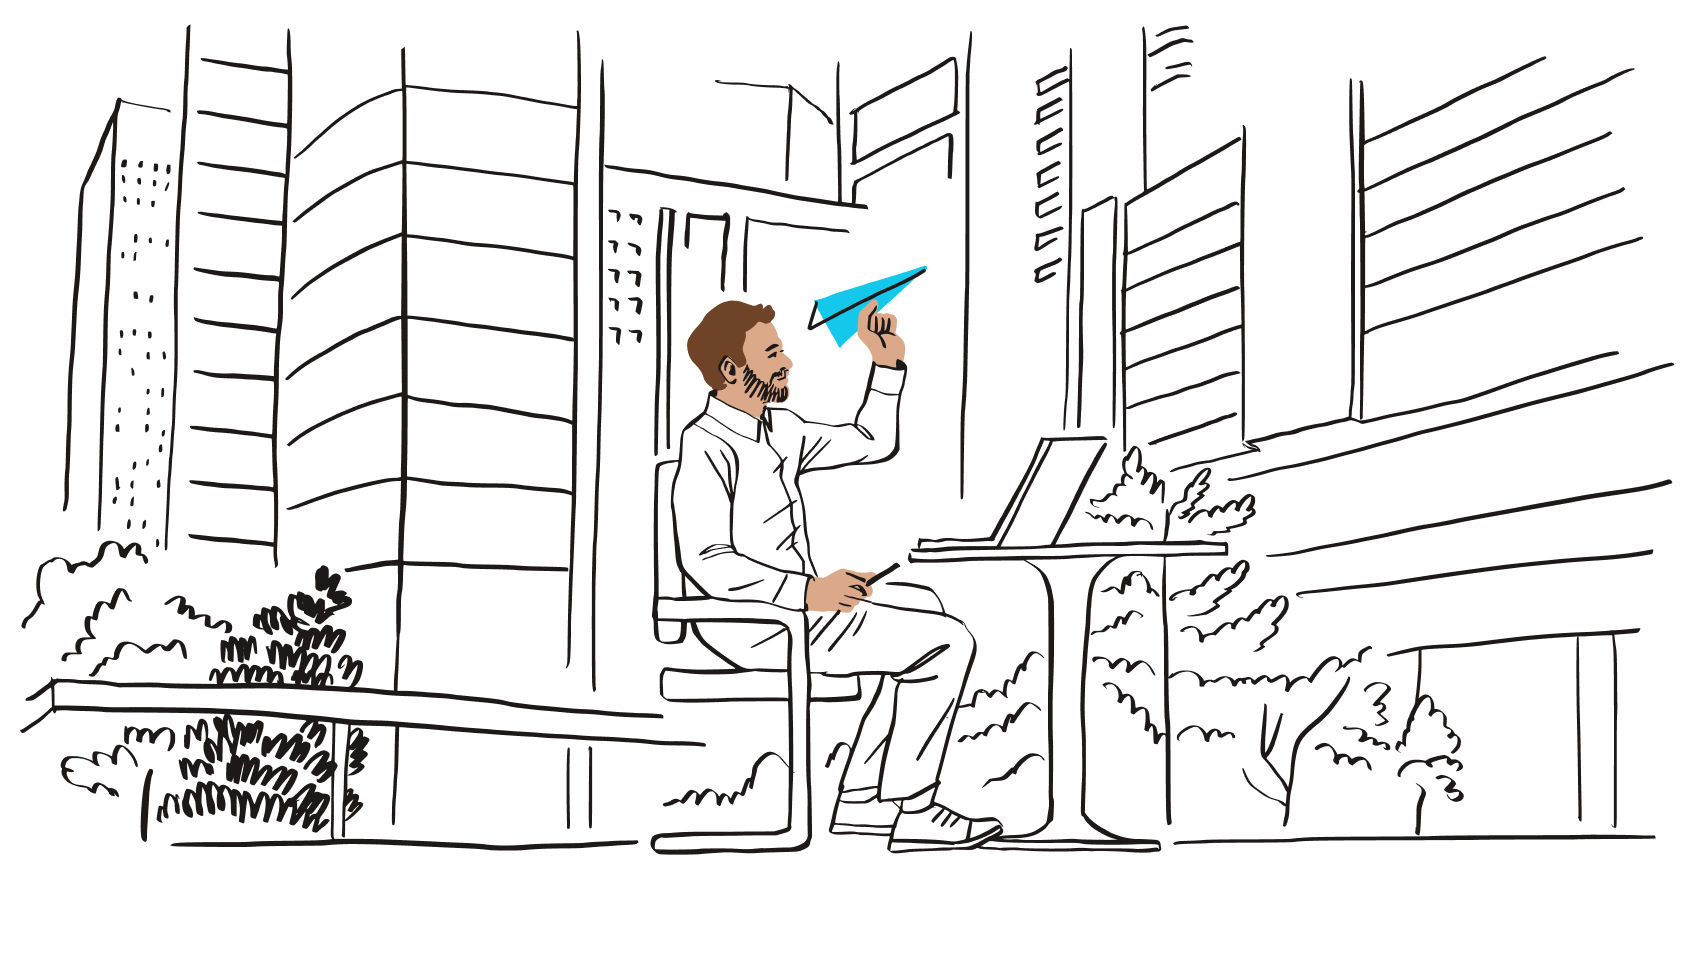 An illustration of a person throwing a paper plane, representing secure password sharing.